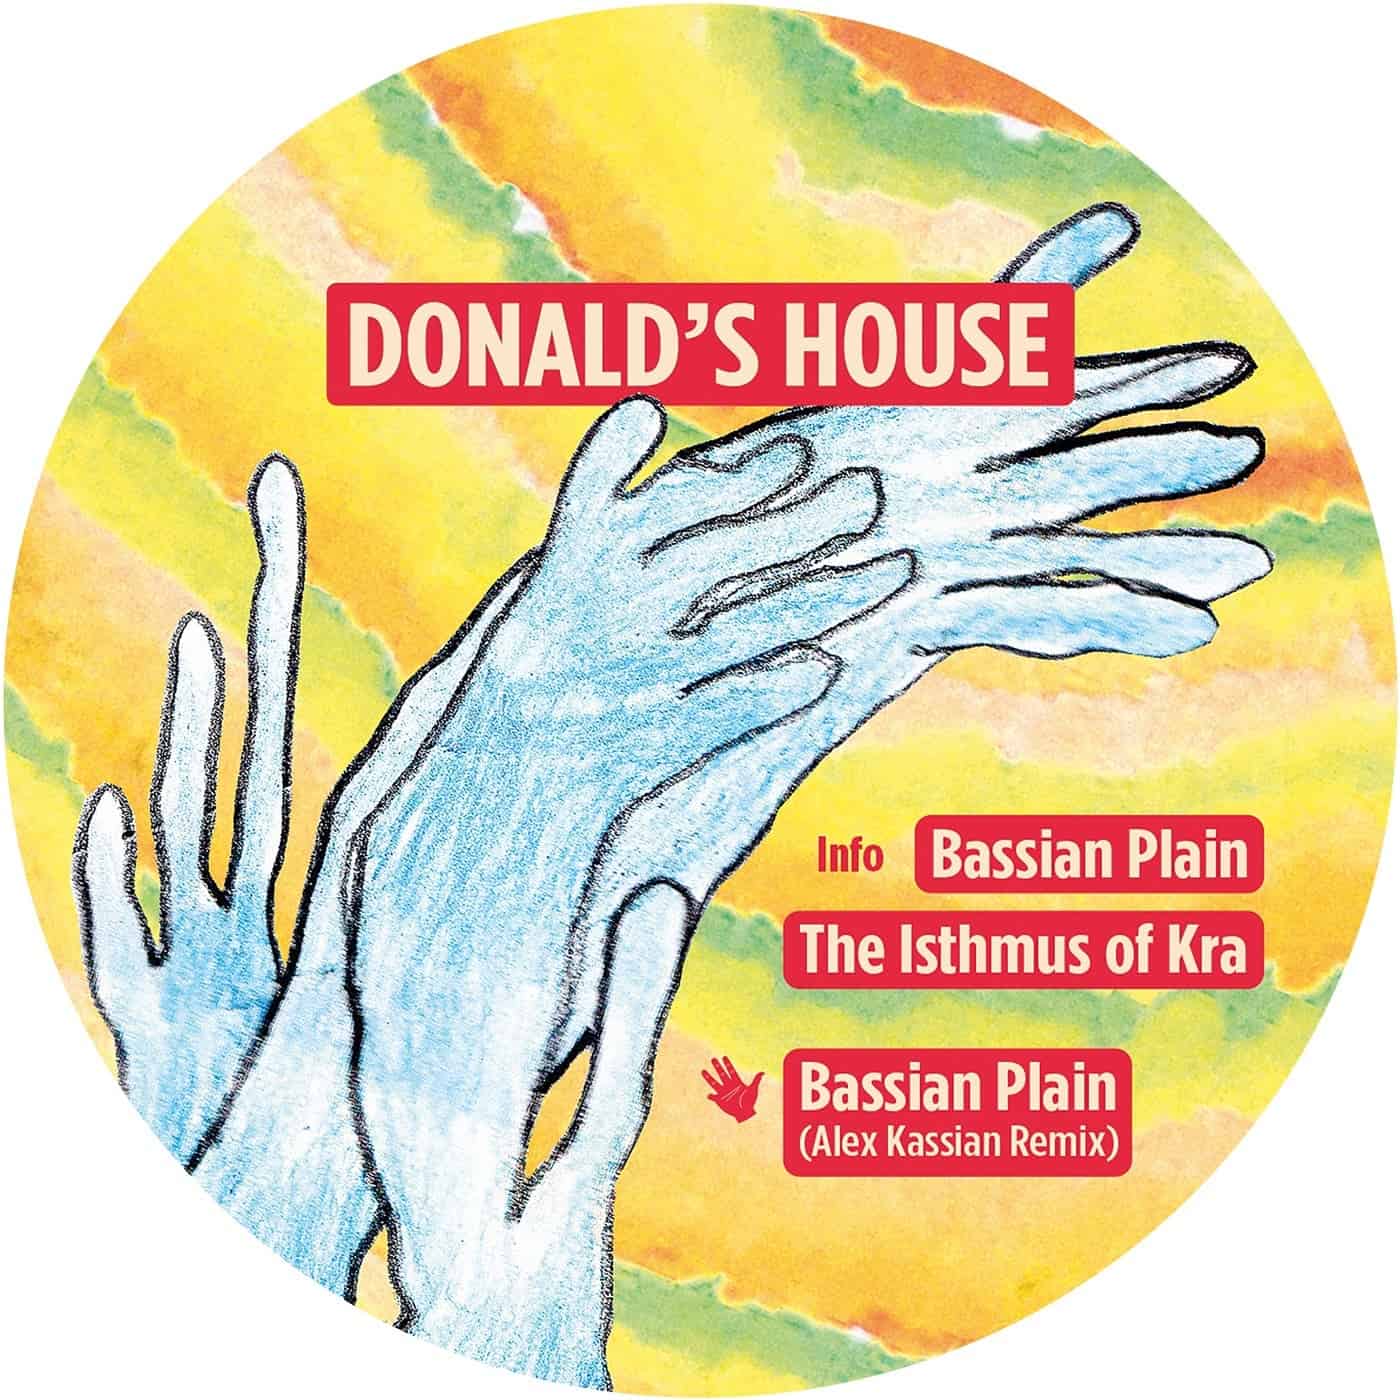 Download Donald's House - Bassian Plain EP on Electrobuzz